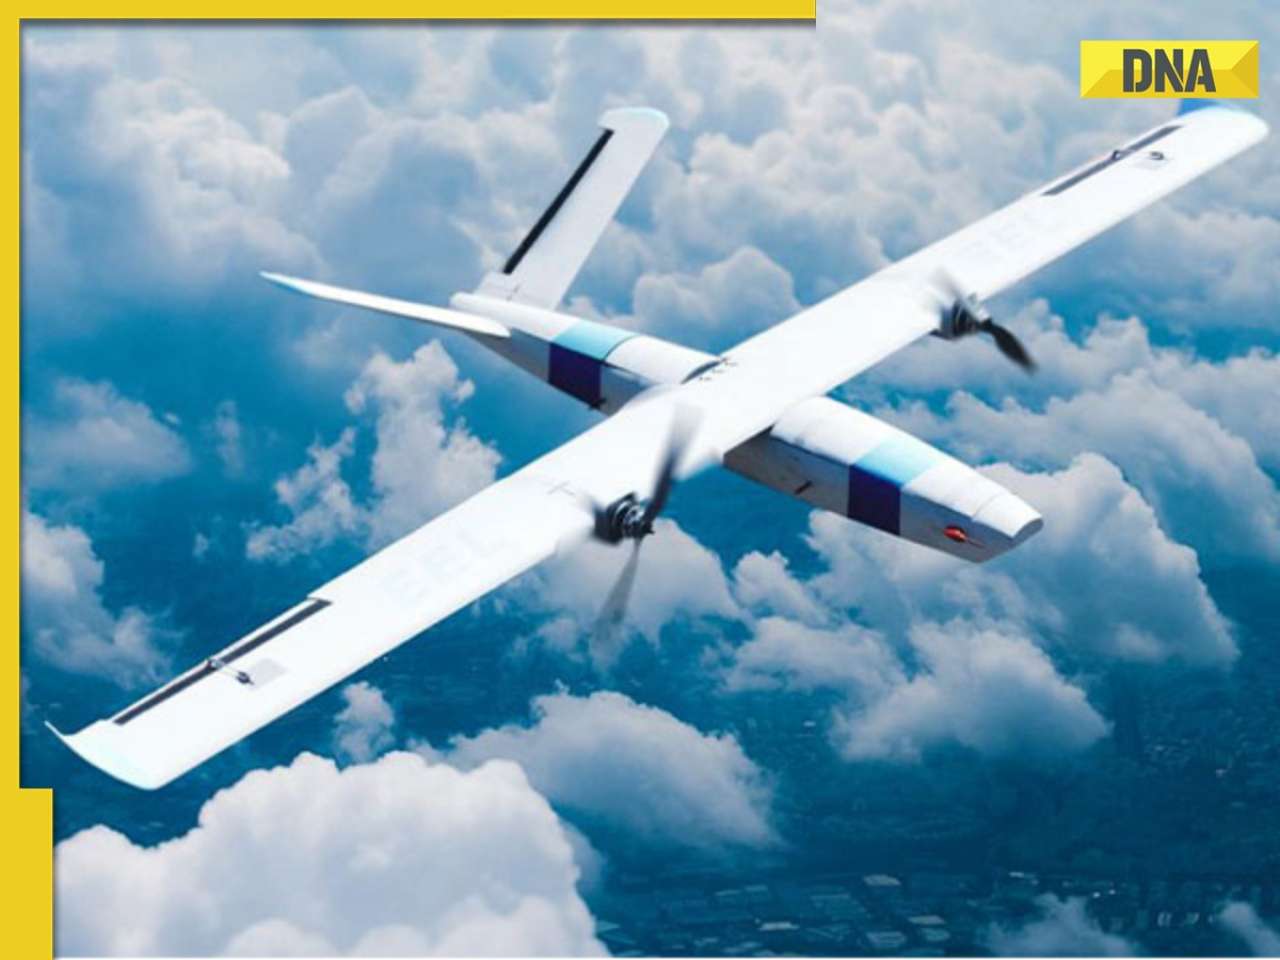 Nagastra-1: India’s first indigenous suicide drone